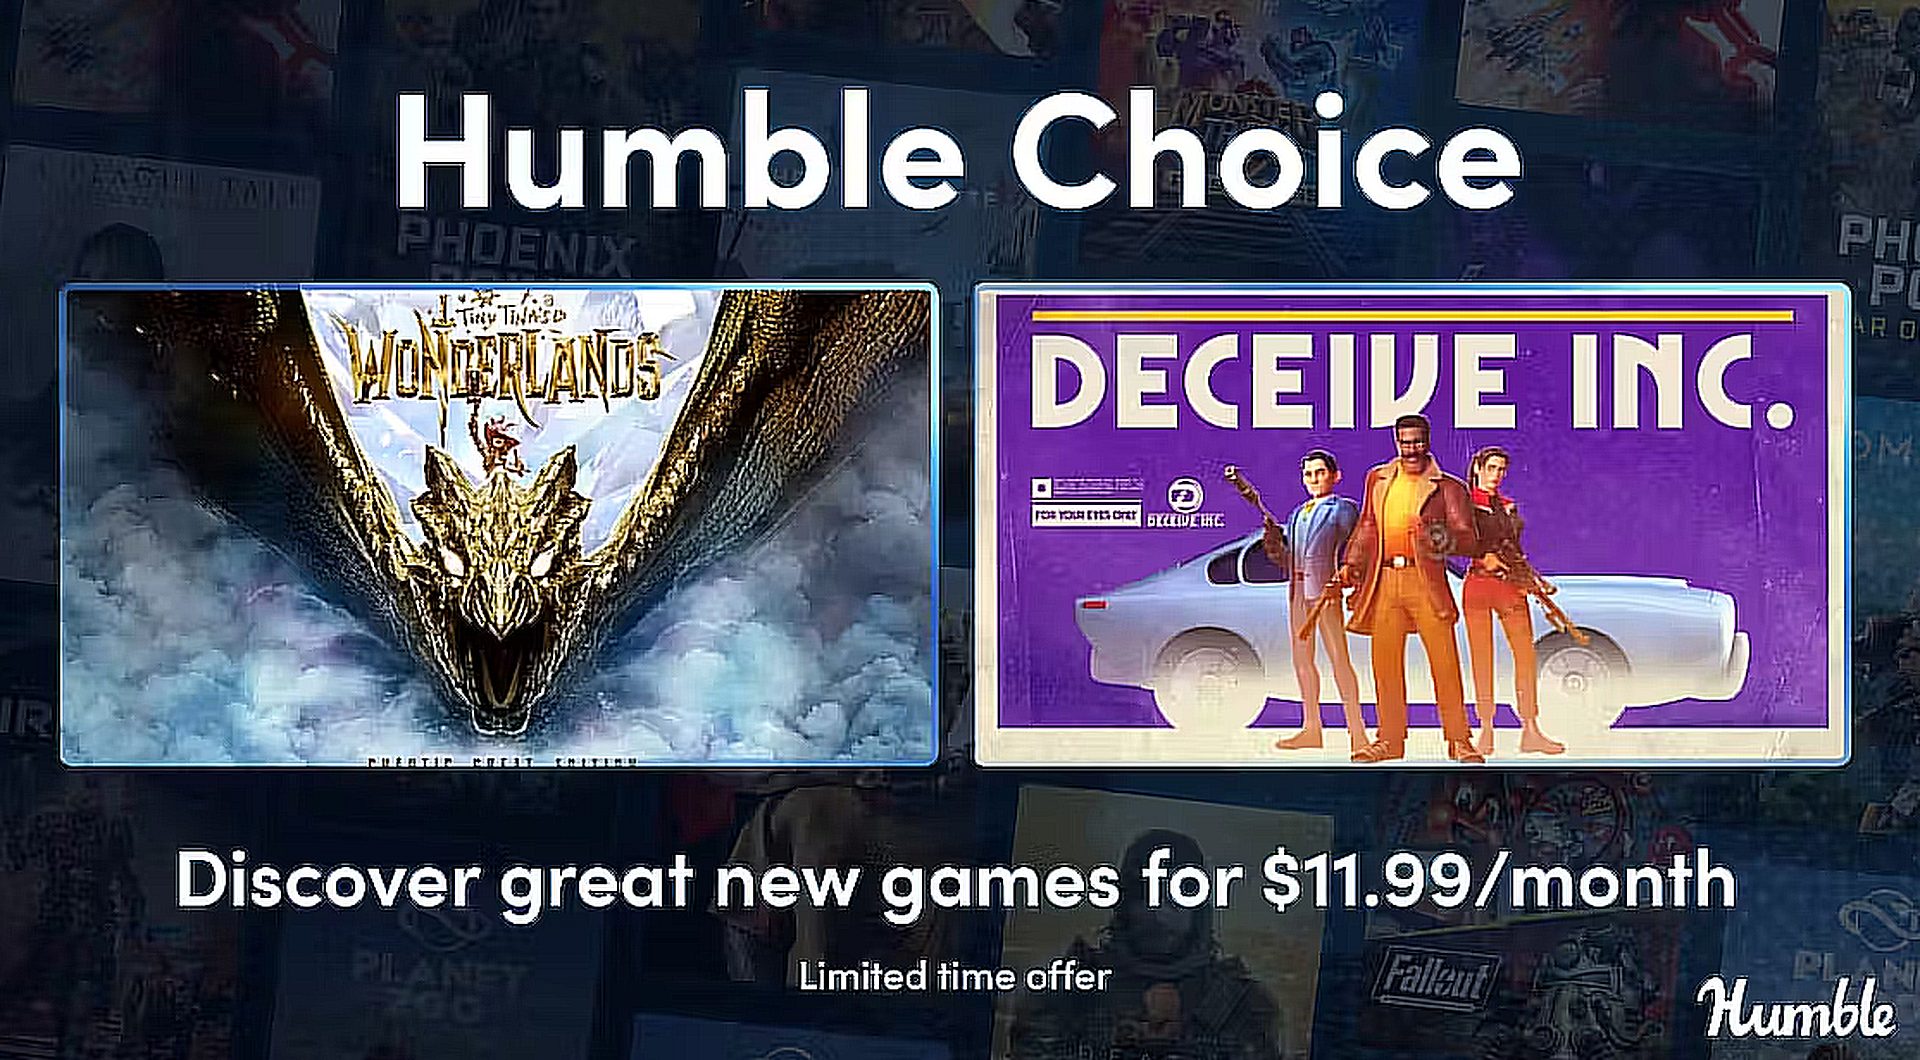 When does Humble Choice change/reset? Monthly games and perks revealed on the 1st Tuesday. Early unlock option. No game expiration. Explore!